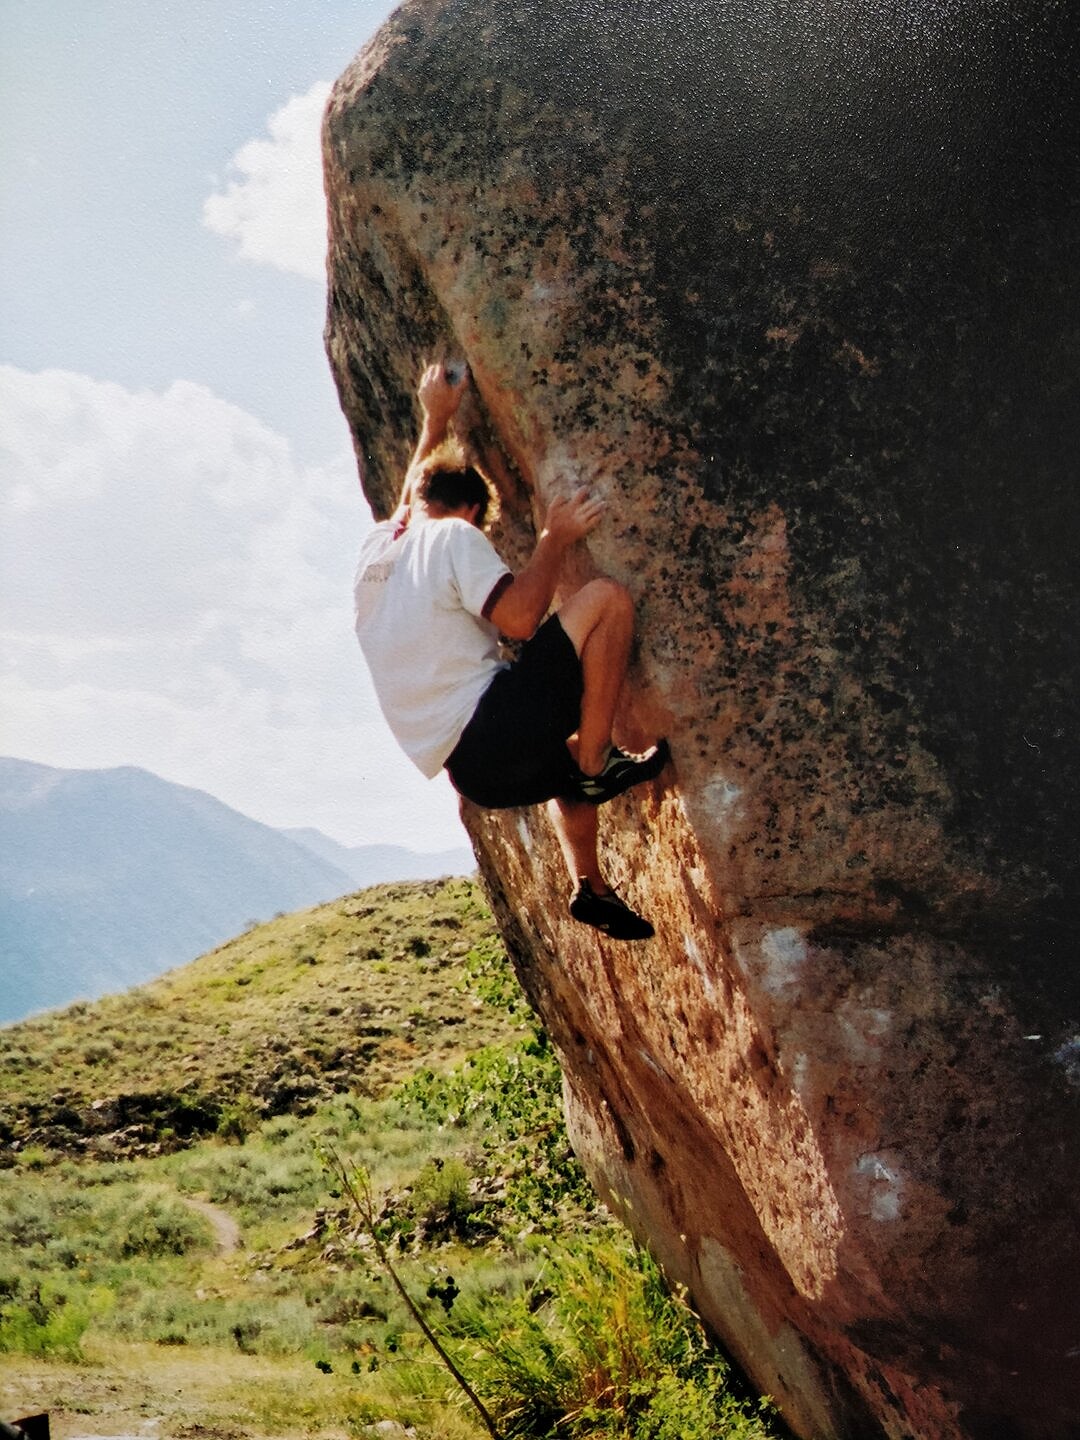 Toby bouldering at Skyland, Gunnison, Colorado  © Toby Dunn Collection